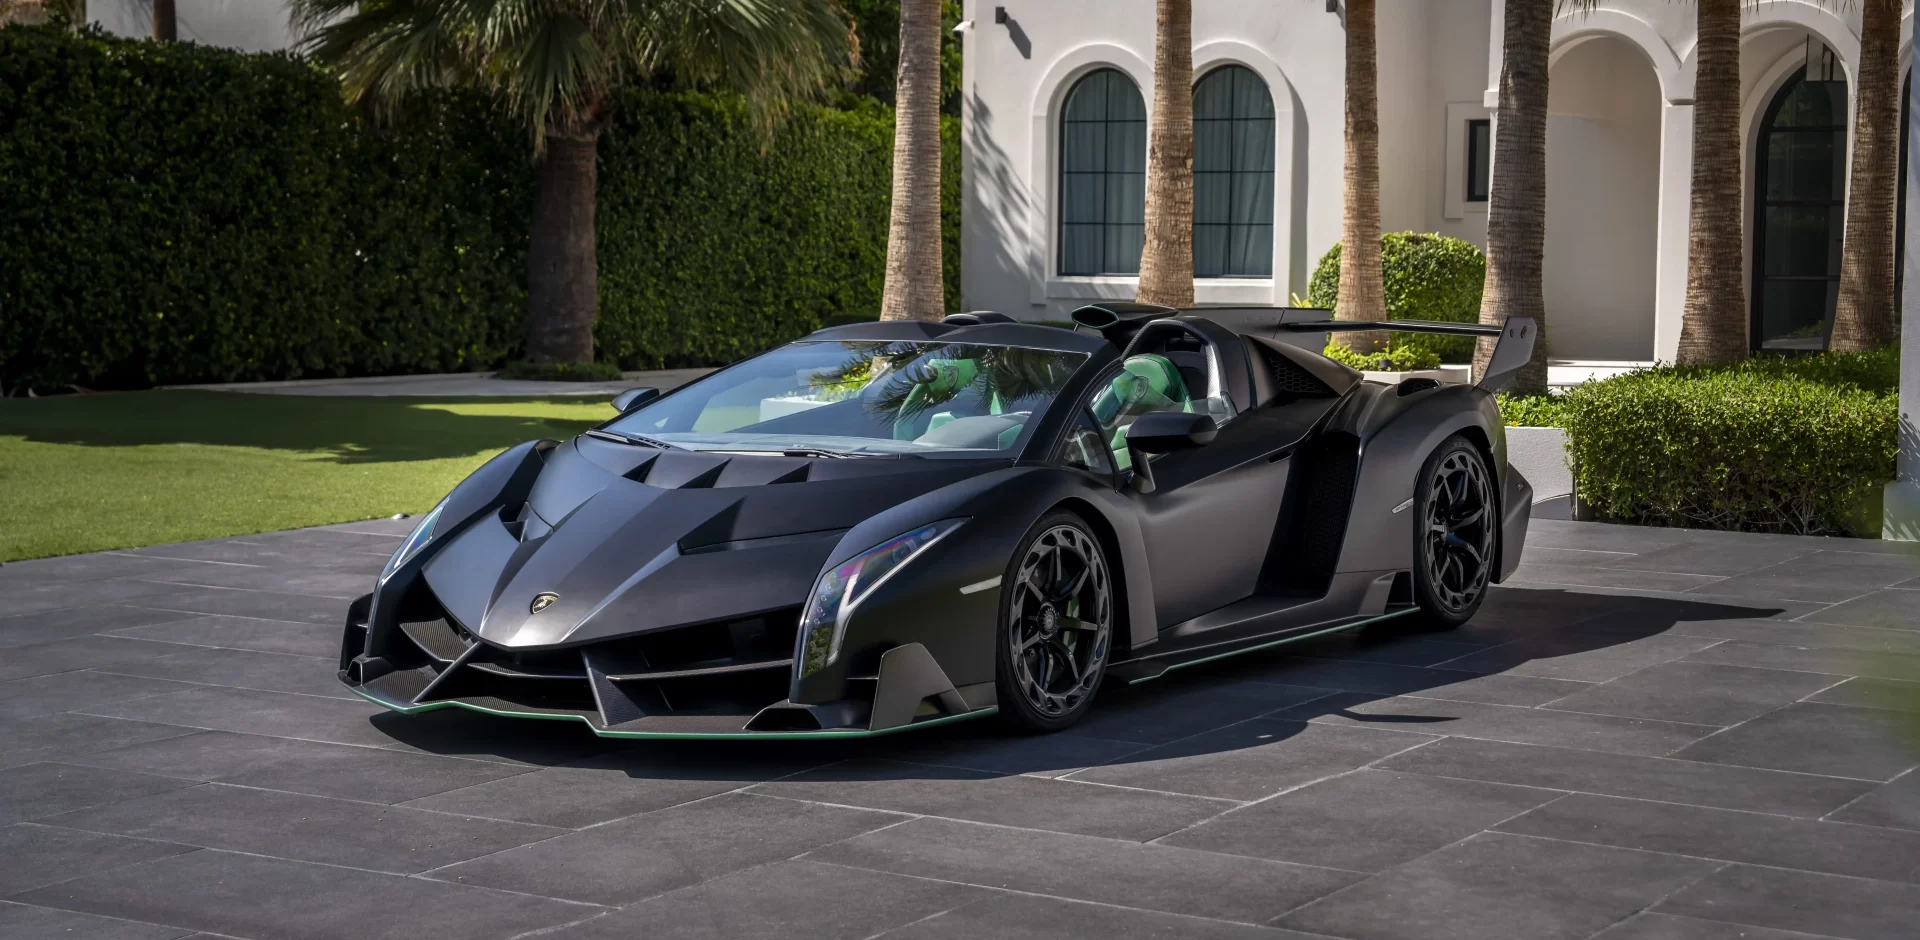 Rare Lamborghini Veneno Roadster sells for £4.7m in record-breaking online auction. One of only nine ever made, this 2015 model boasts a top speed of 221 mph and just 1,105 miles on the clock.